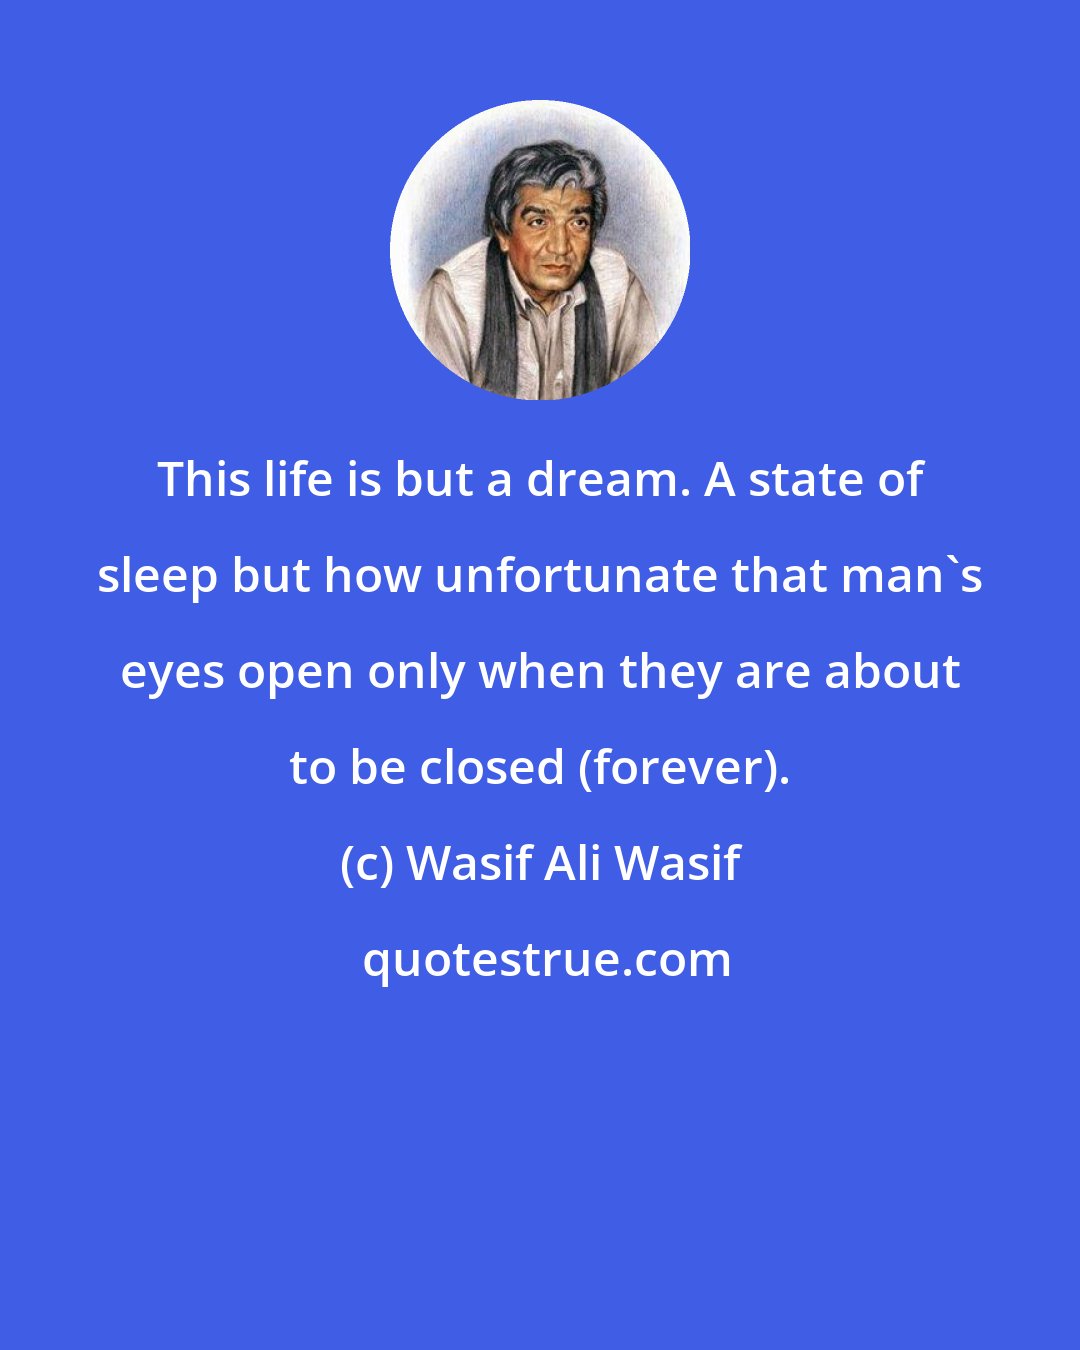 Wasif Ali Wasif: This life is but a dream. A state of sleep but how unfortunate that man's eyes open only when they are about to be closed (forever).